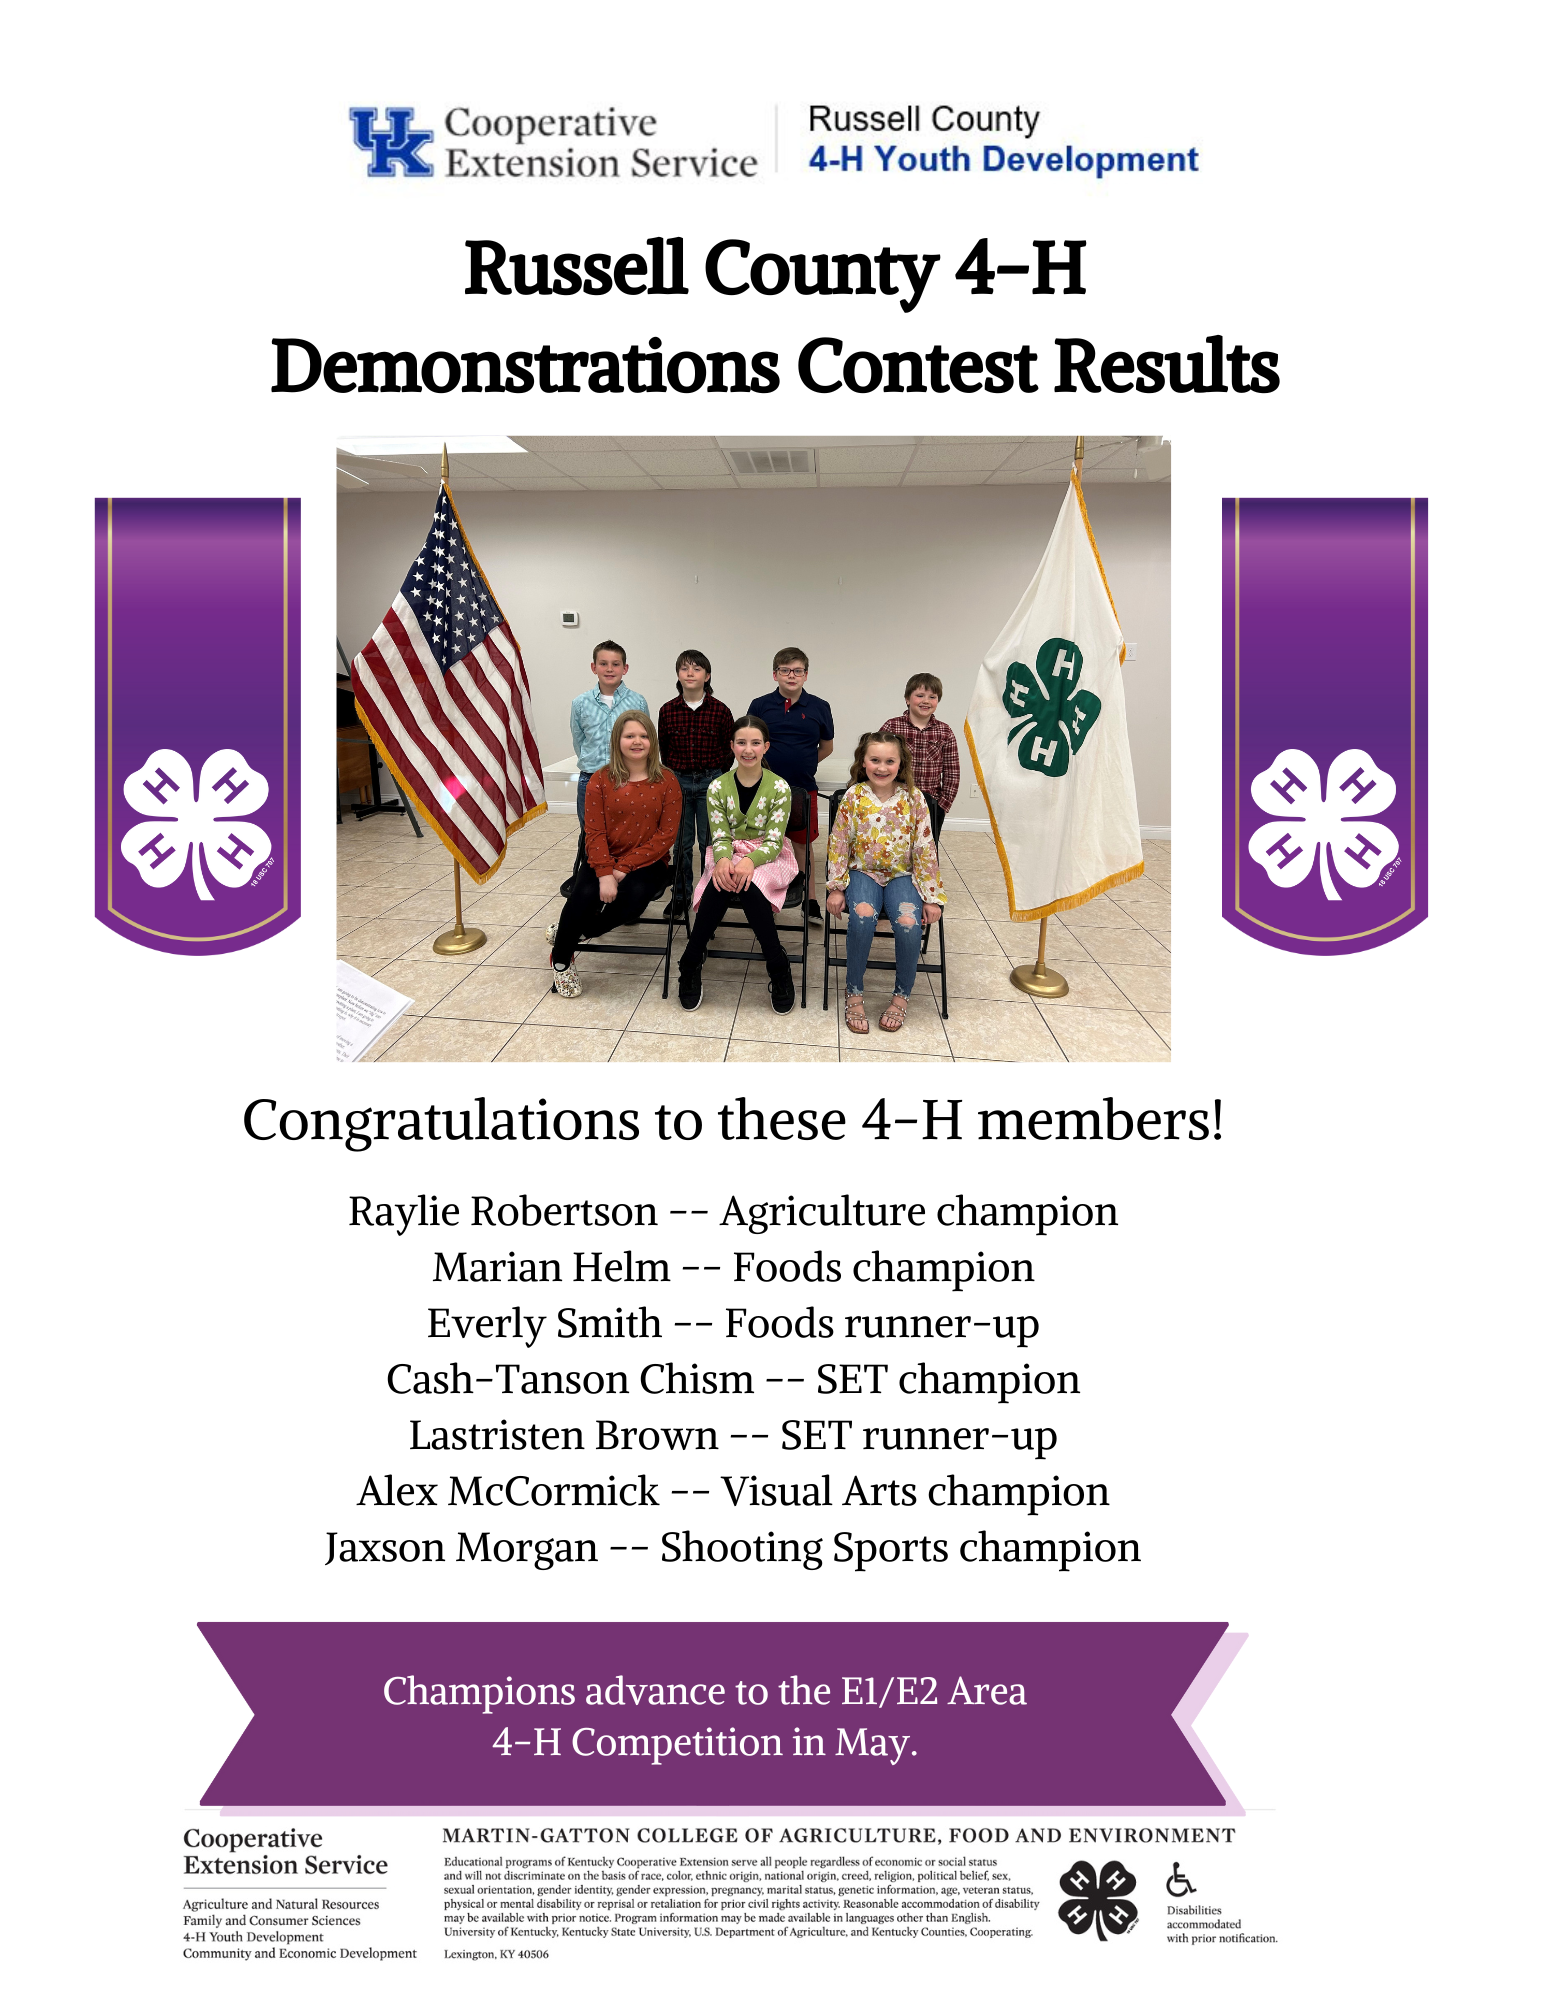 4-H Demonstrations Contest Results